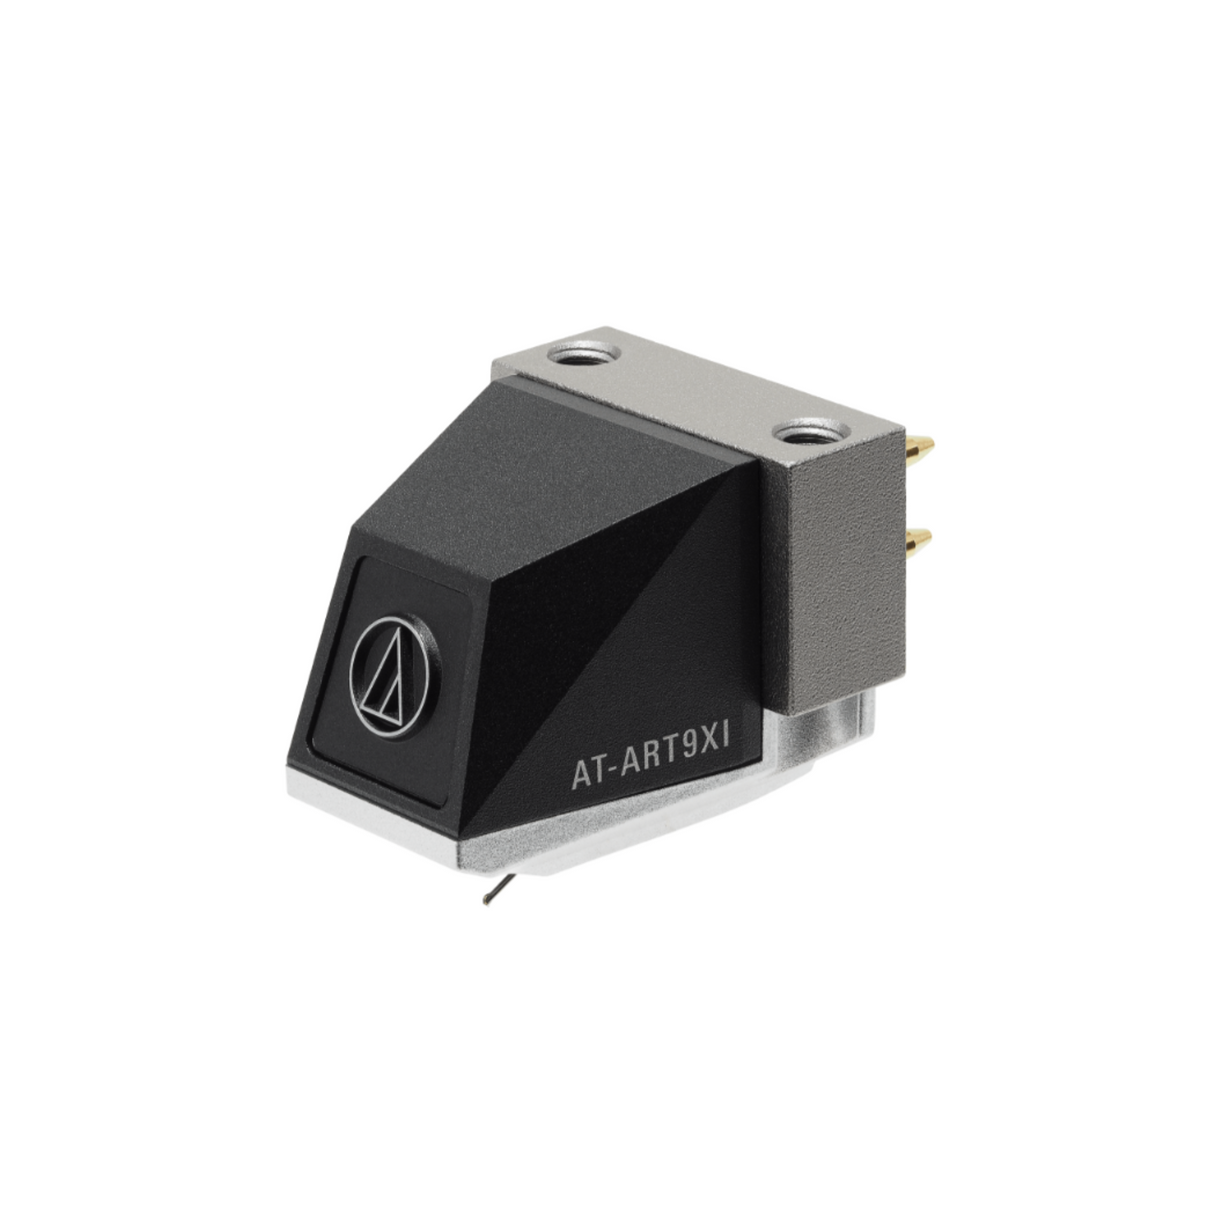 Audio Technica AT-ART9XI Dual Moving Coil Stereo Cartridge (Non-Magnetic Core)